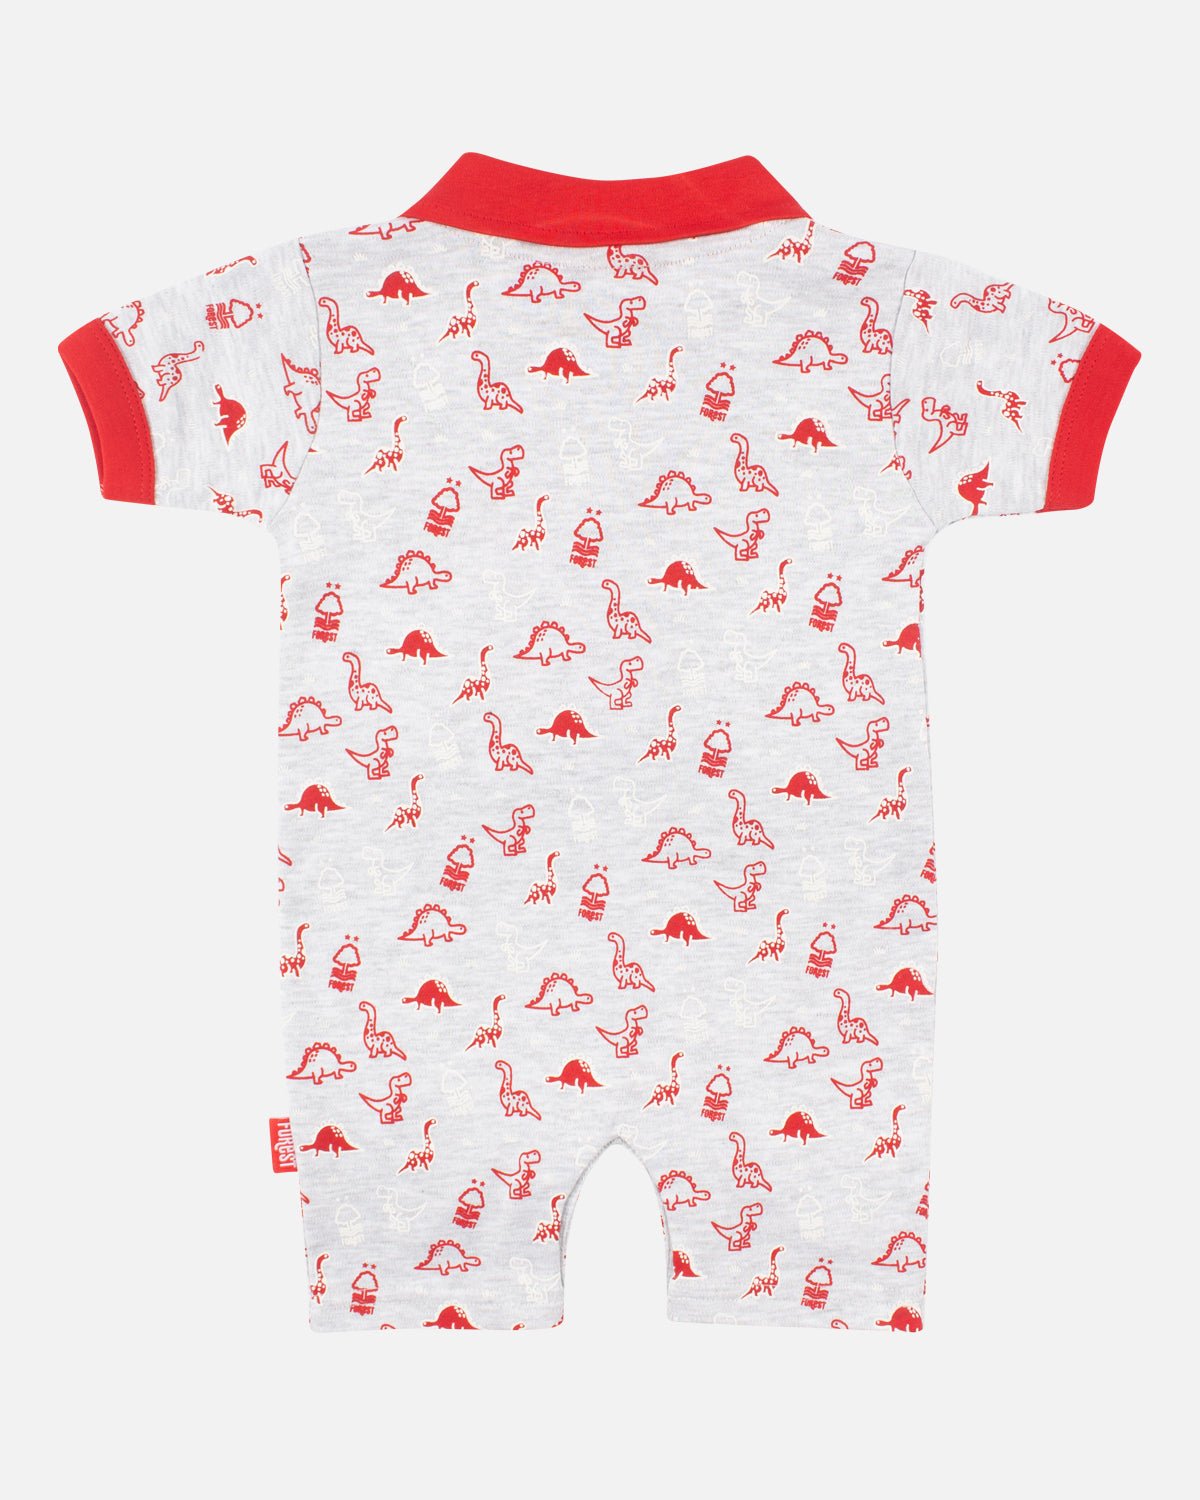 NFFC Dino Baby Romper - Nottingham Forest FC